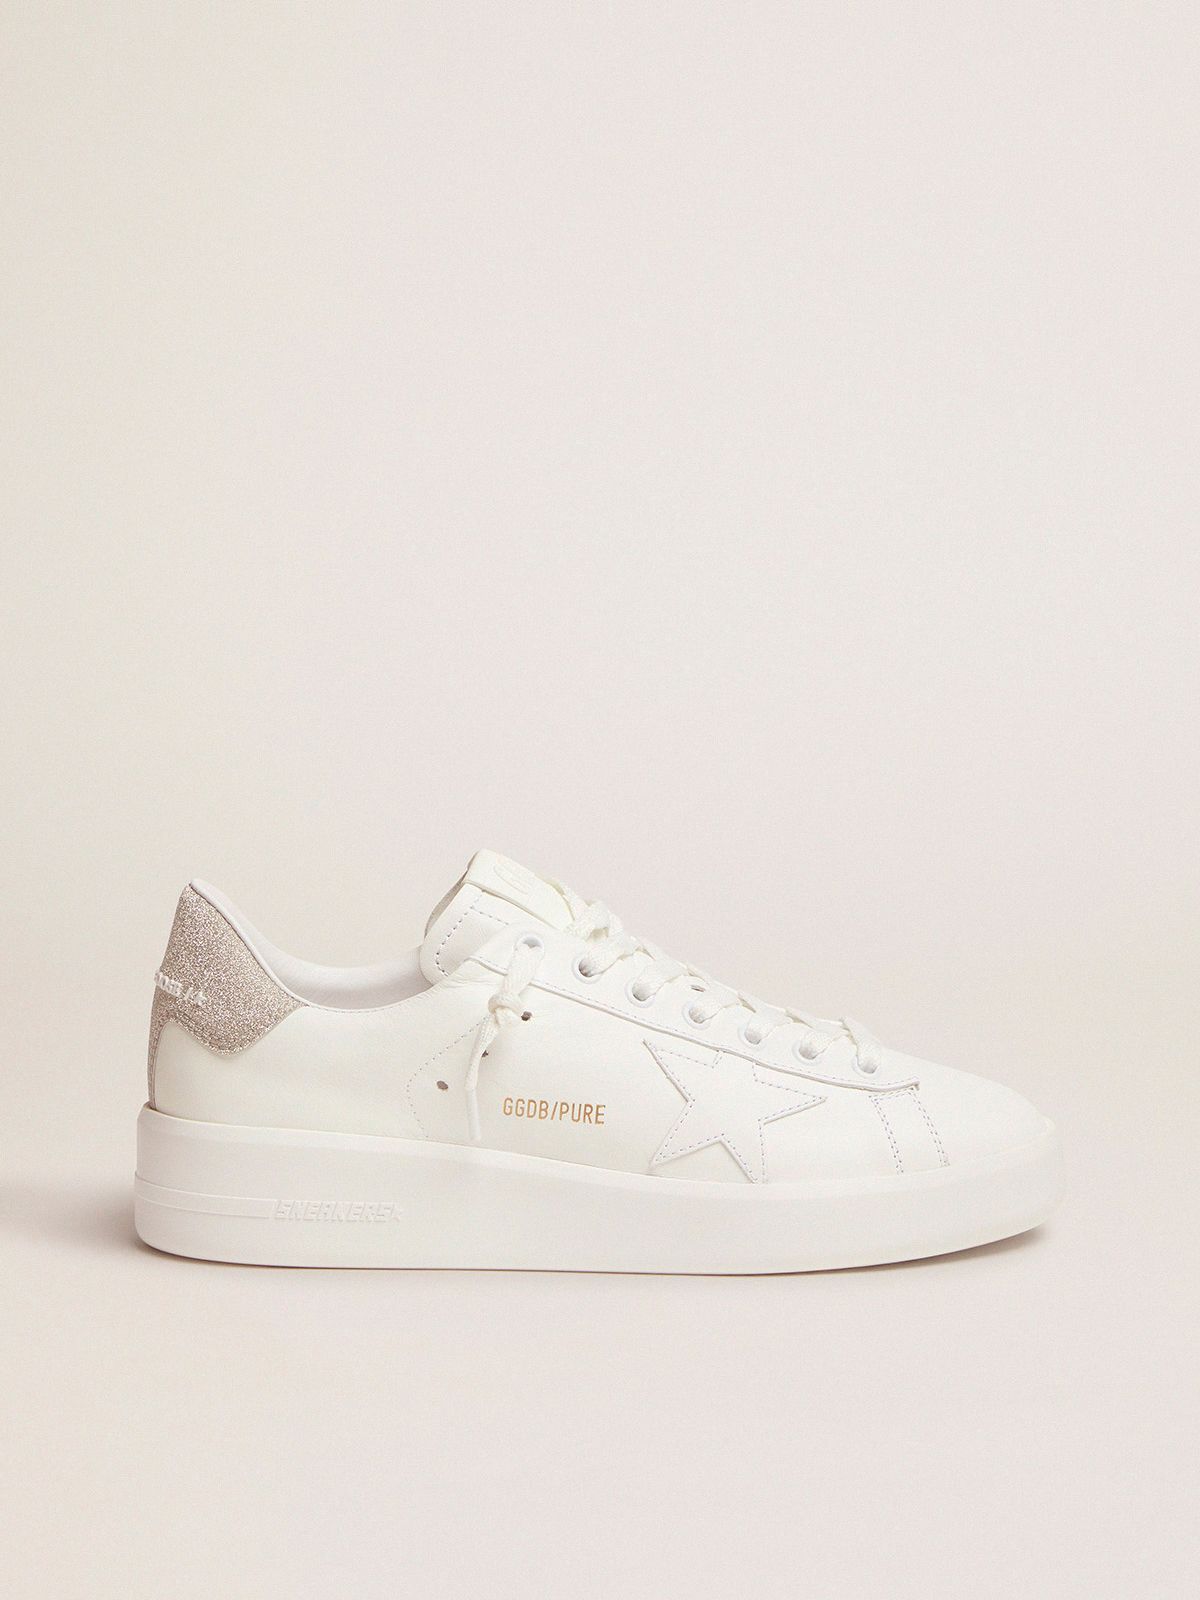 golden goose sneakers white leather with glitter tab champagne heel Purestar in